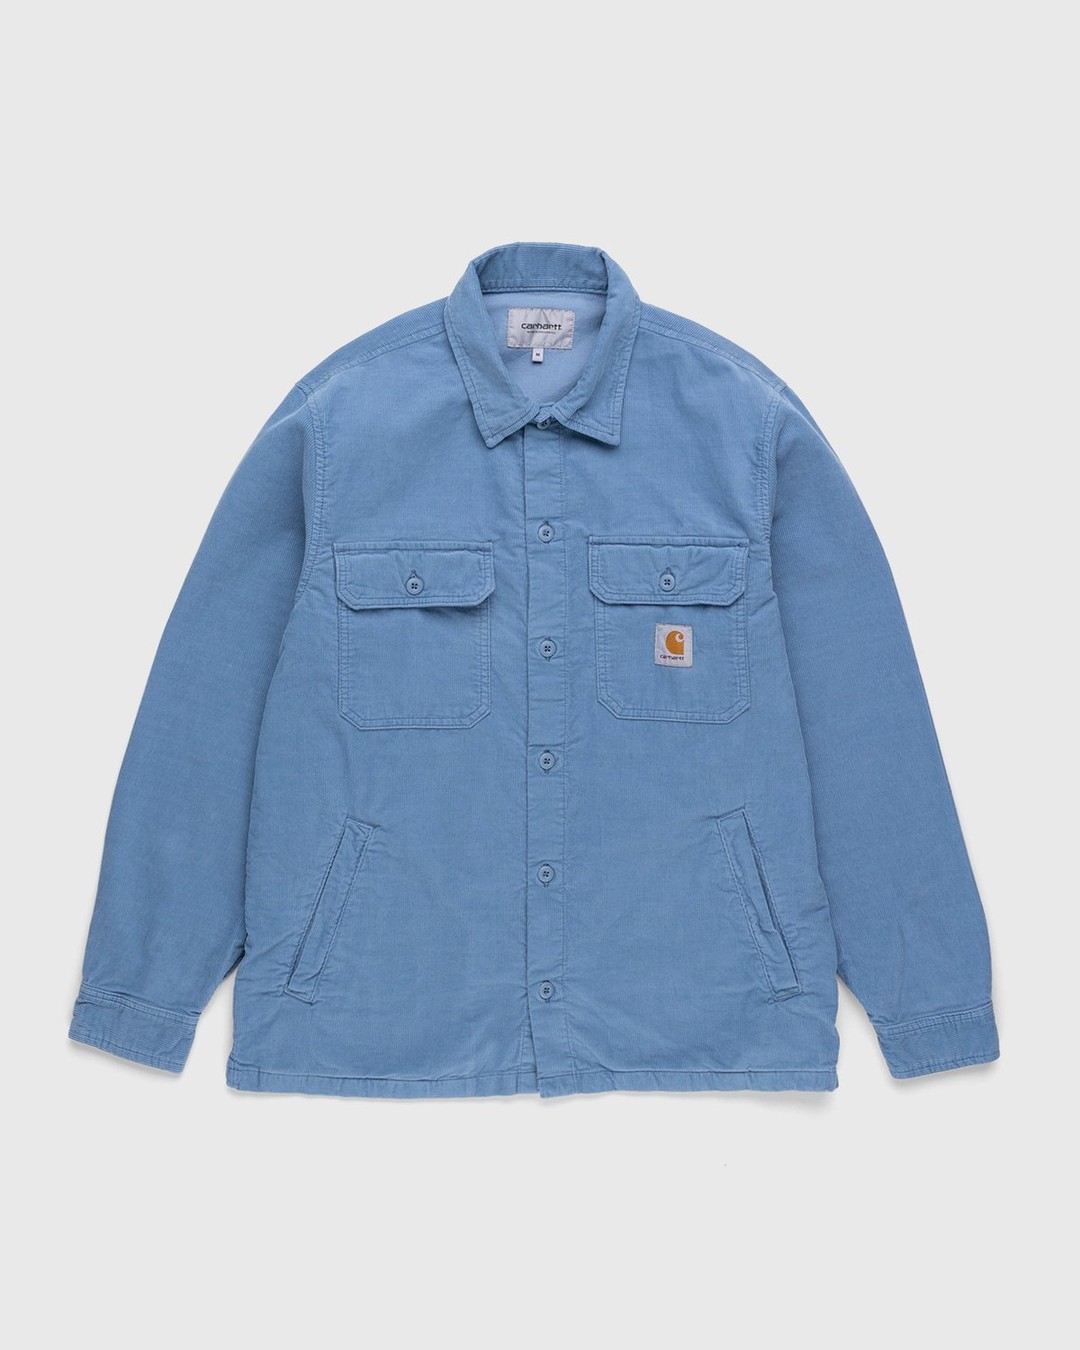 Carhartt WIP – Dixon Shirt Jacket Icy Water Rinsed - Outerwear - Blue - Image 1